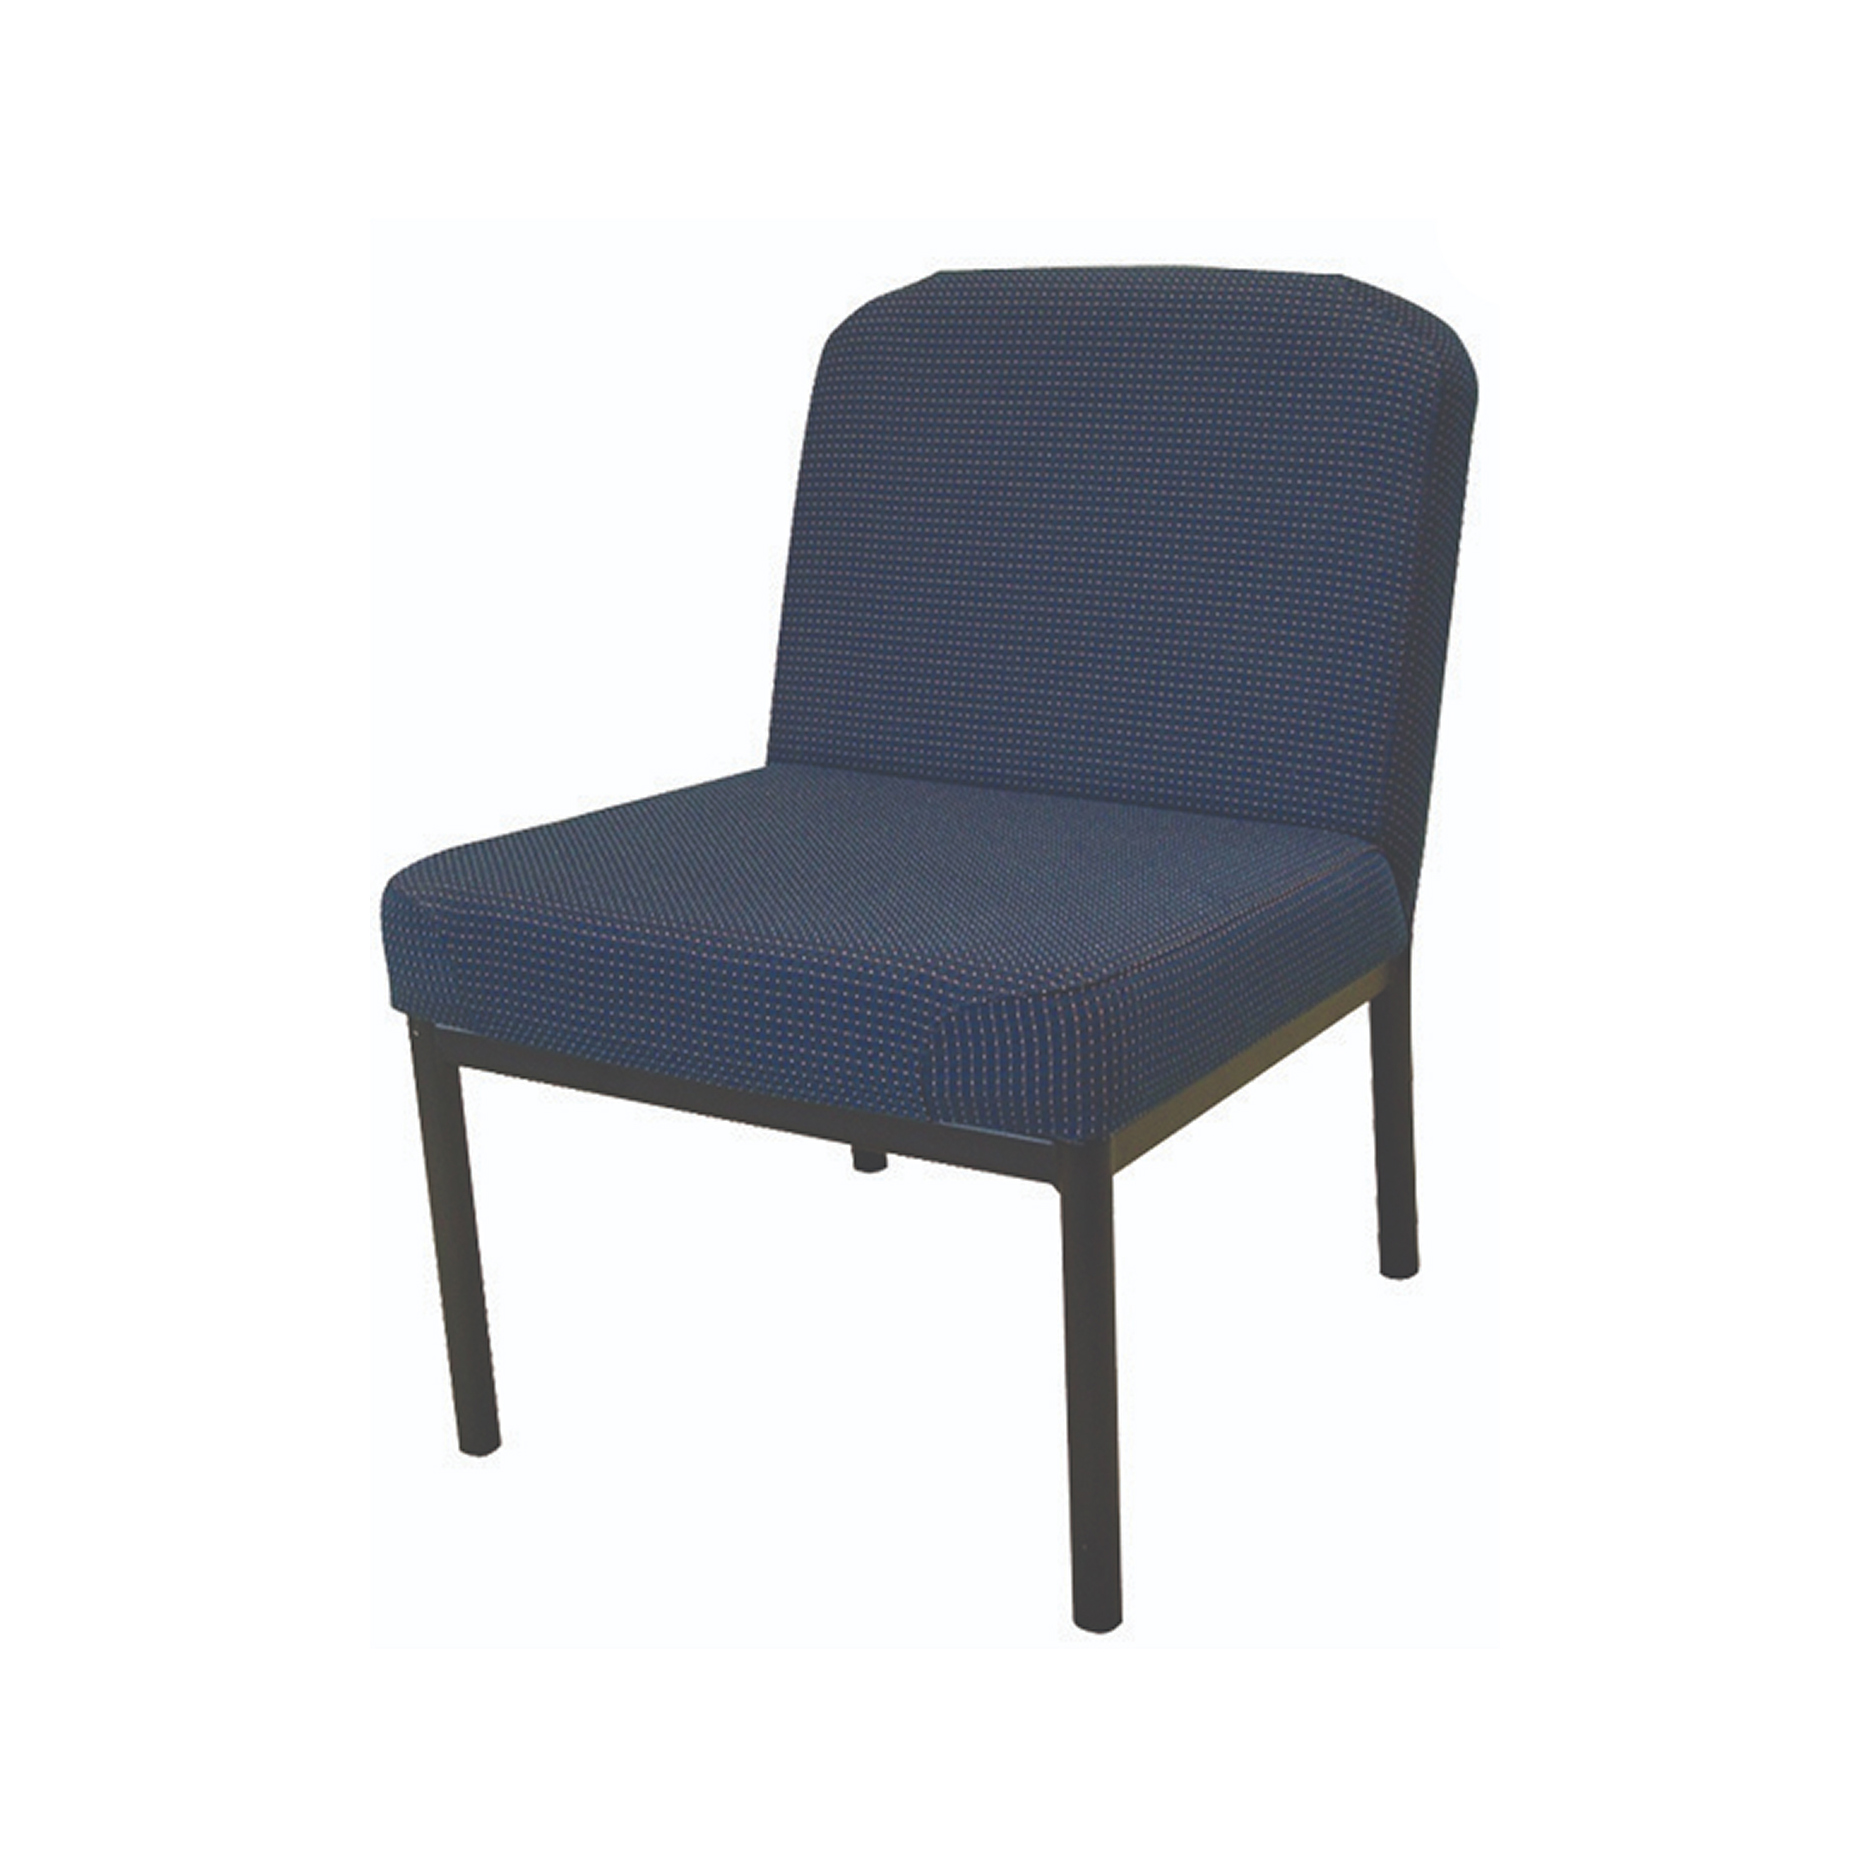 Educated furniture mayfair chair for staffroom and administration areas